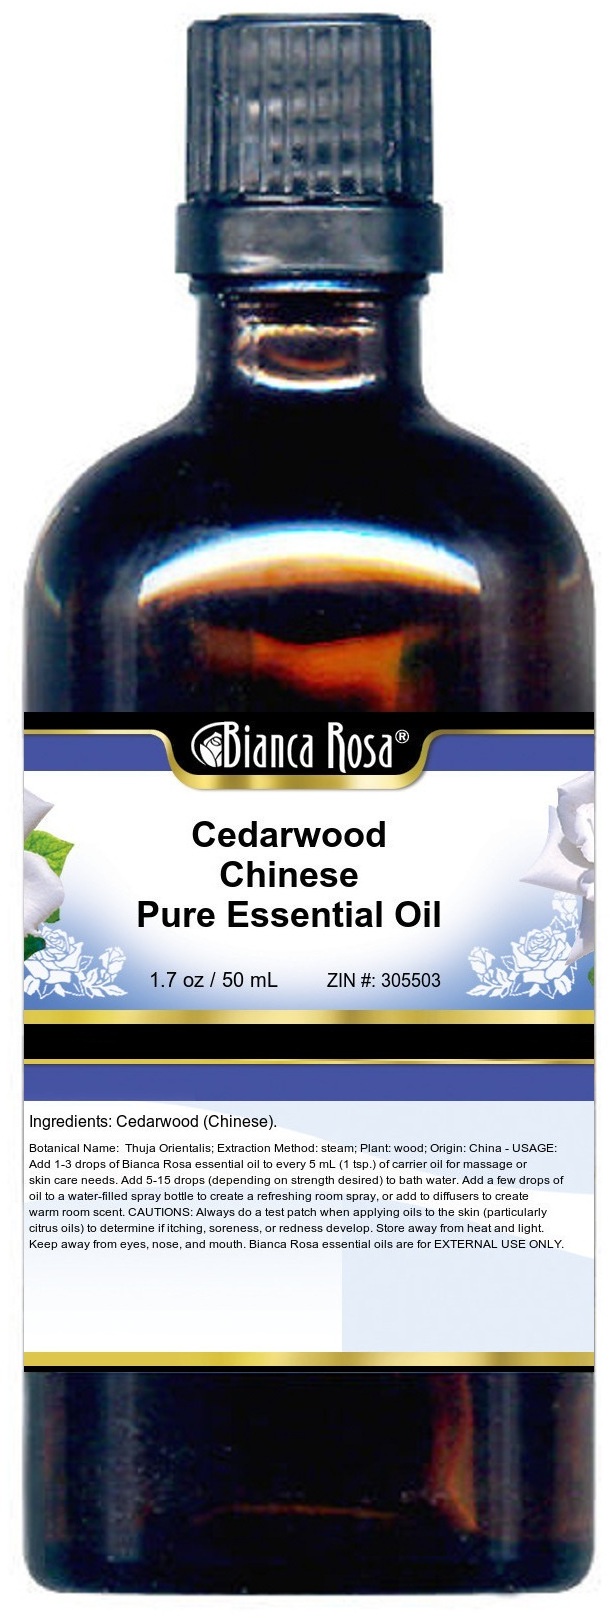 Cedarwood Chinese Pure Essential Oil